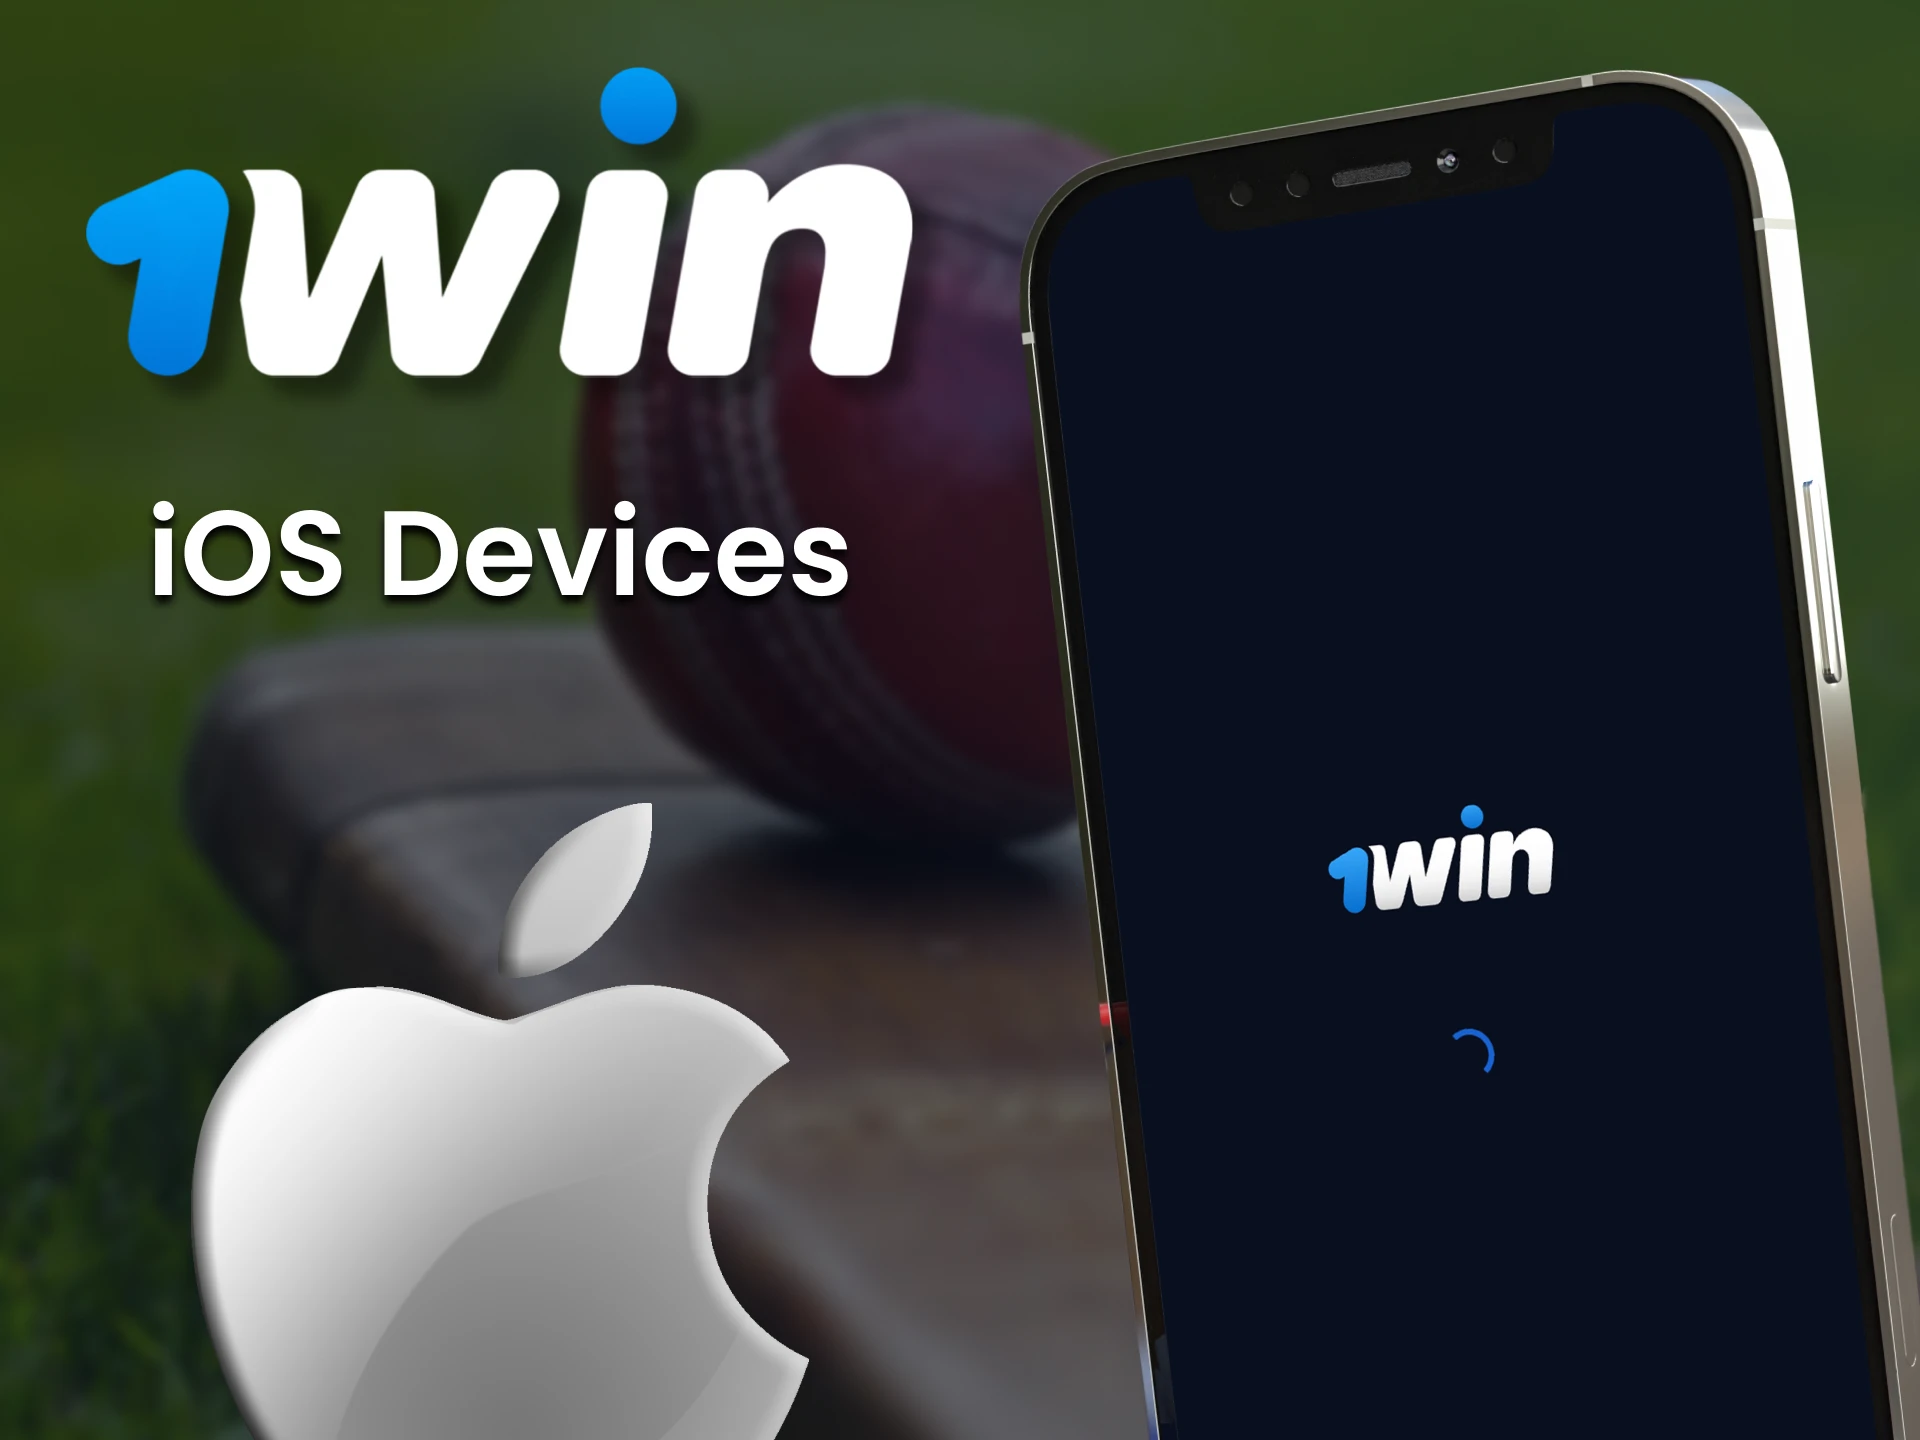 iOS devices supported by the 1win app.